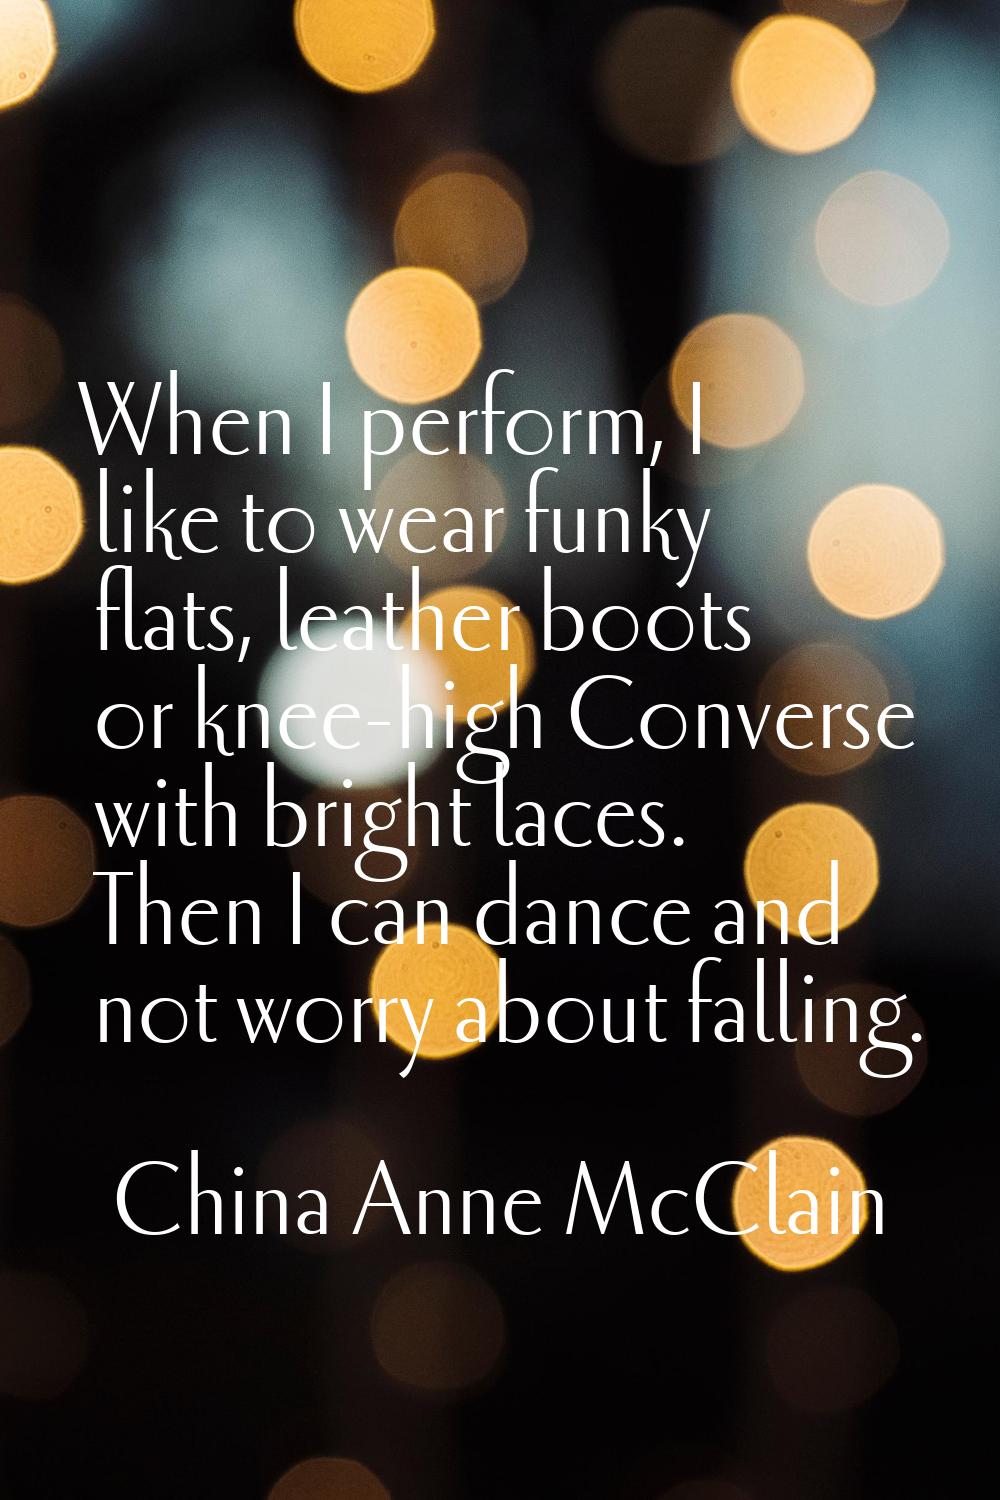 When I perform, I like to wear funky flats, leather boots or knee-high Converse with bright laces. 